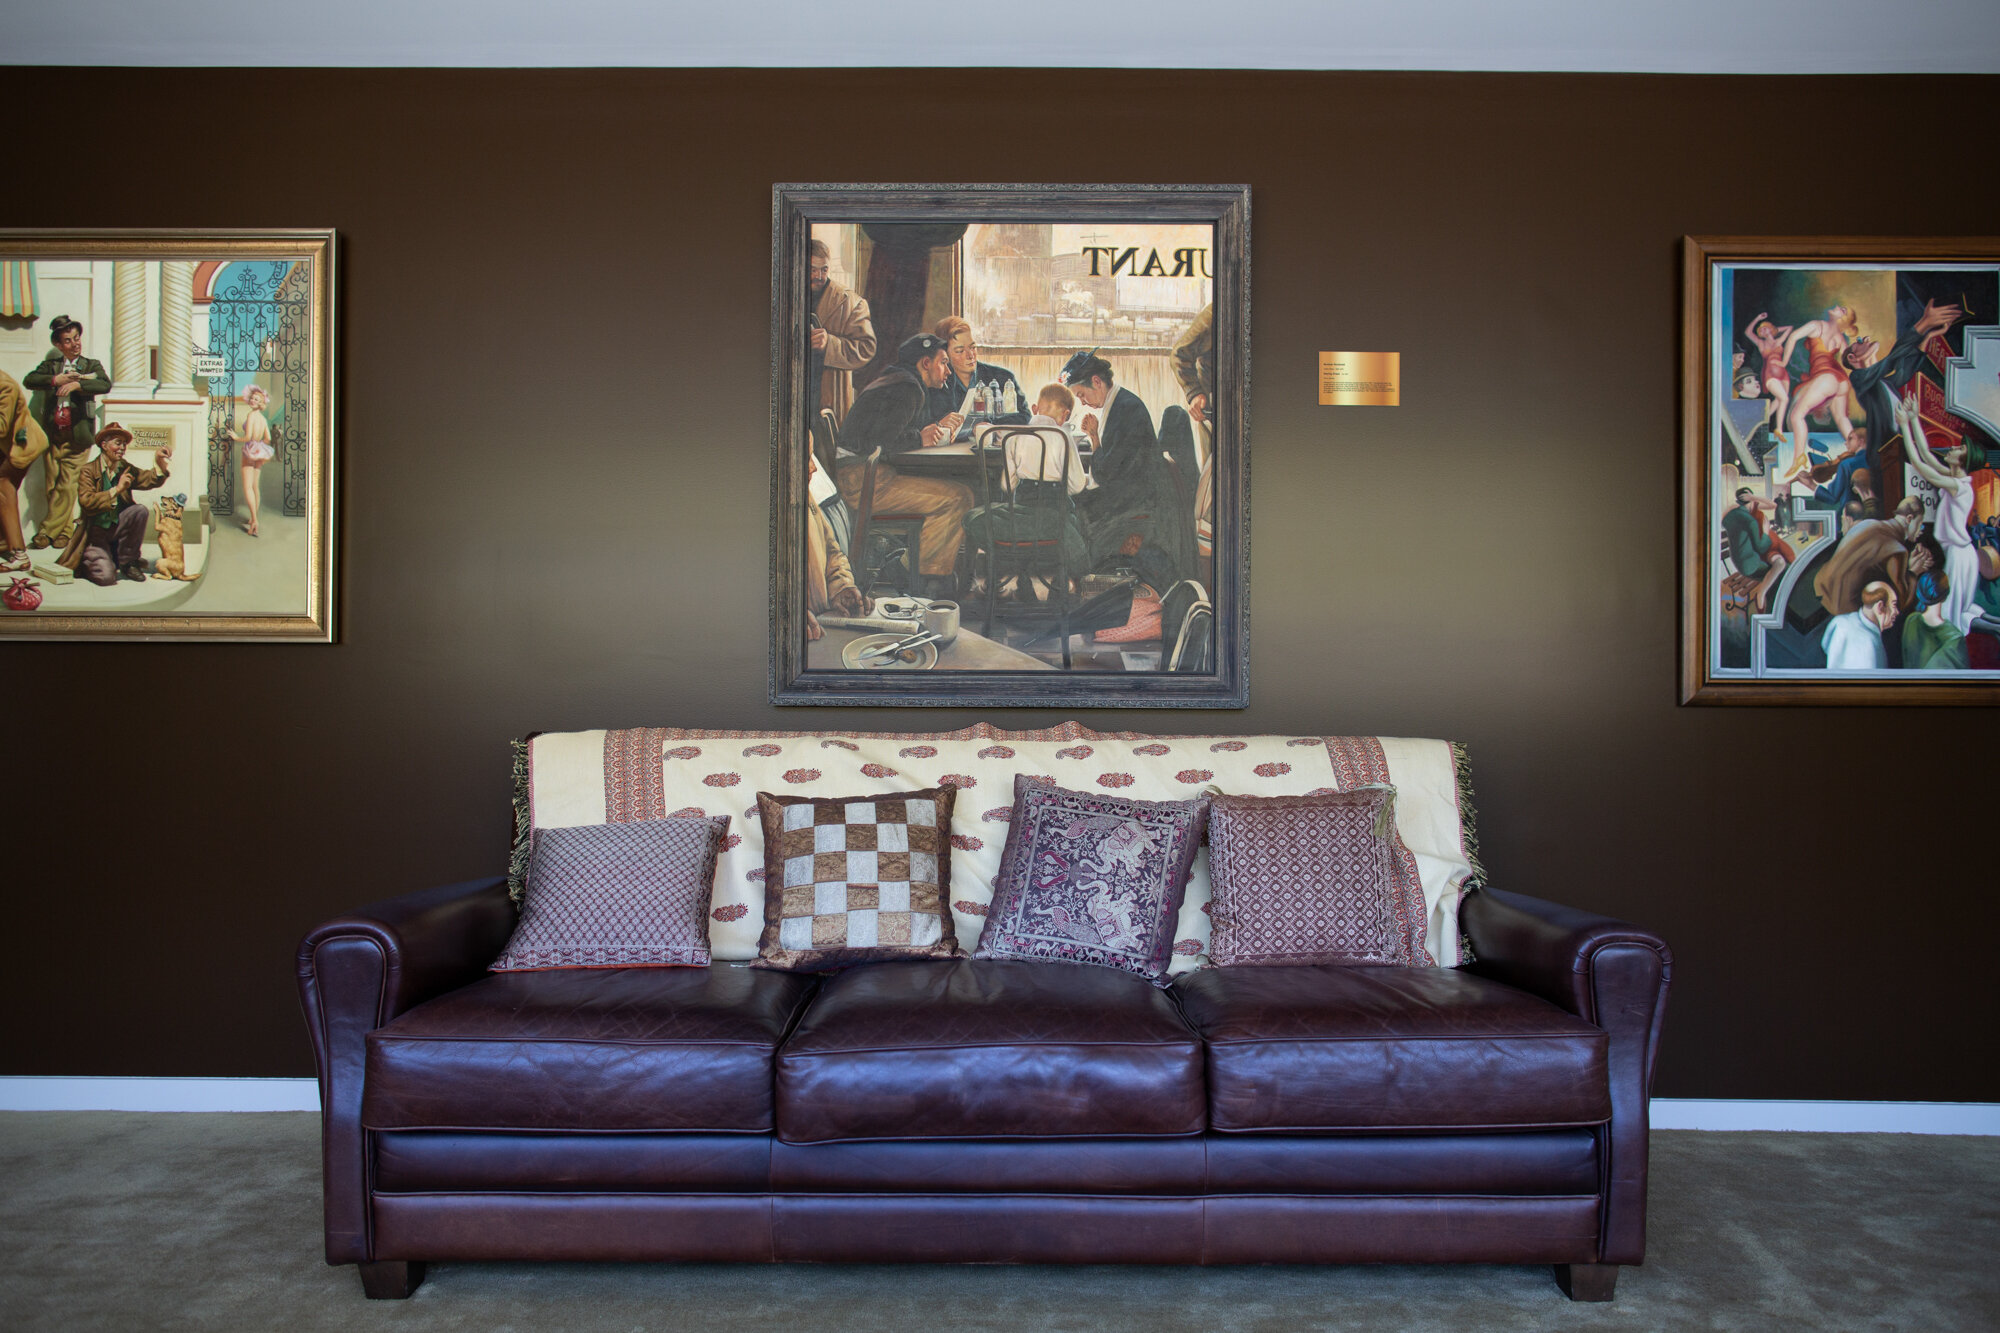 Experience our art gallery during your stay